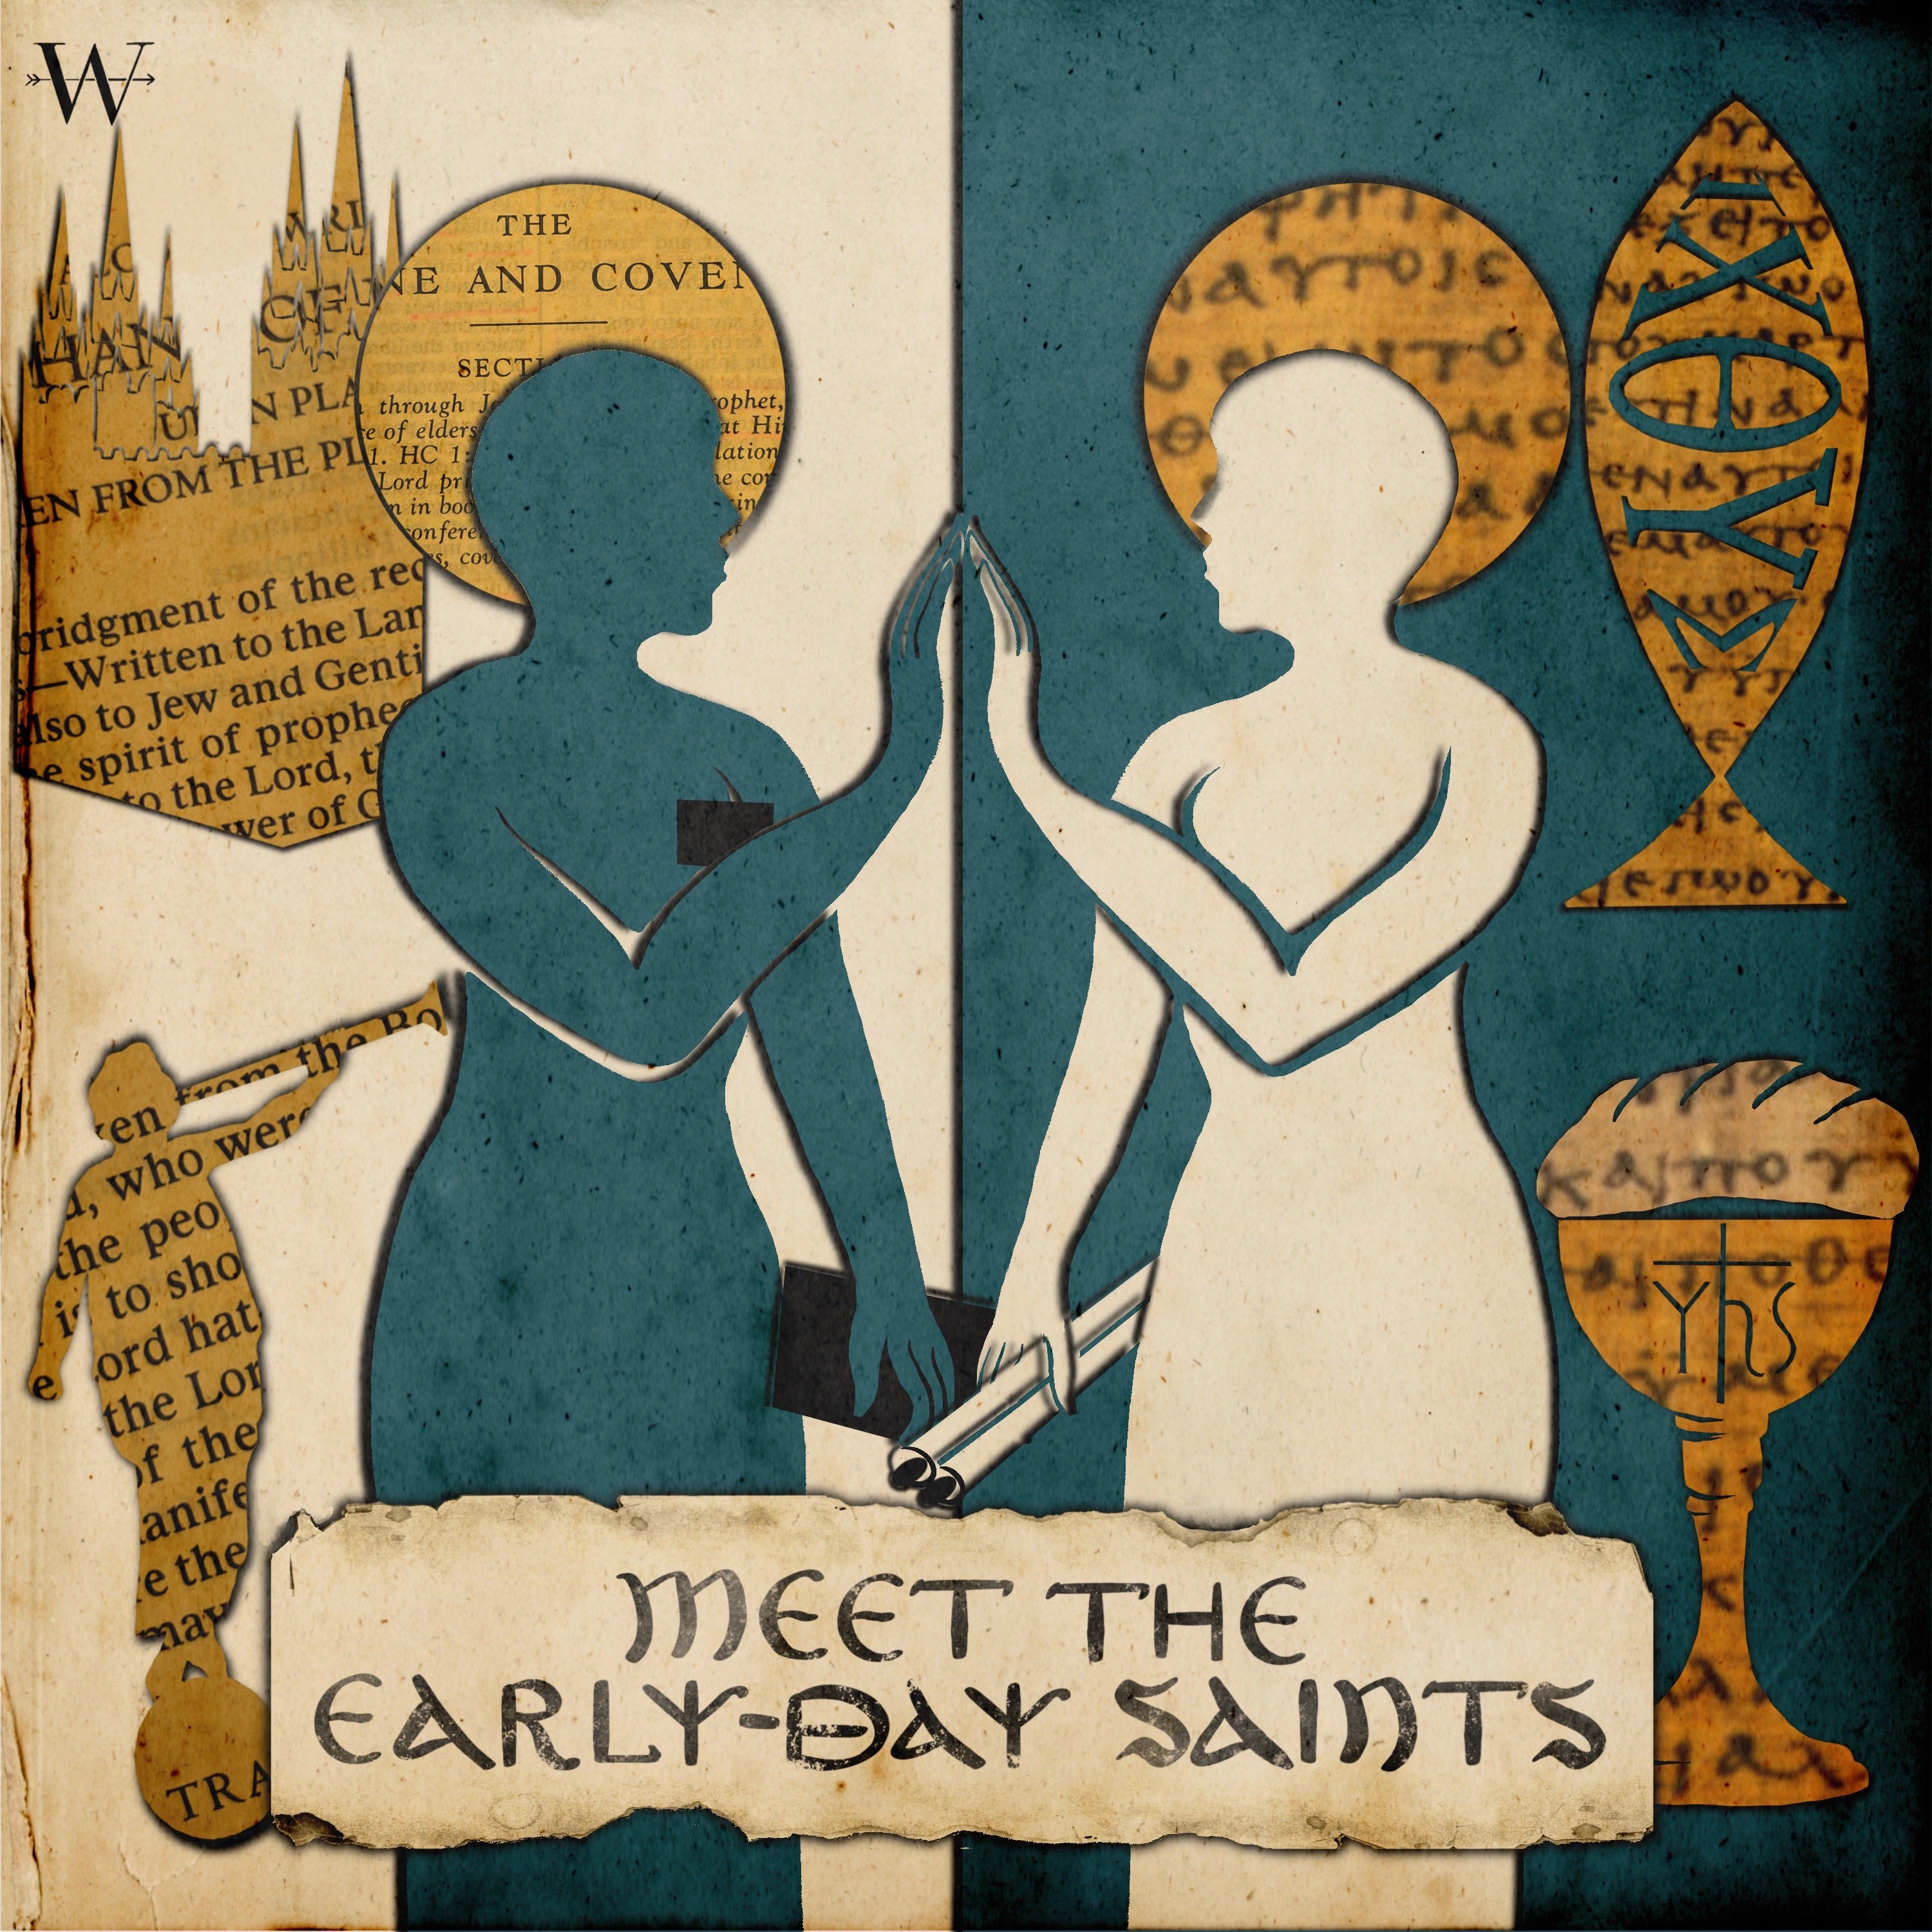 Meet the Early-day Saints Episode 12: The Afterlife, with D. Jill Kirby